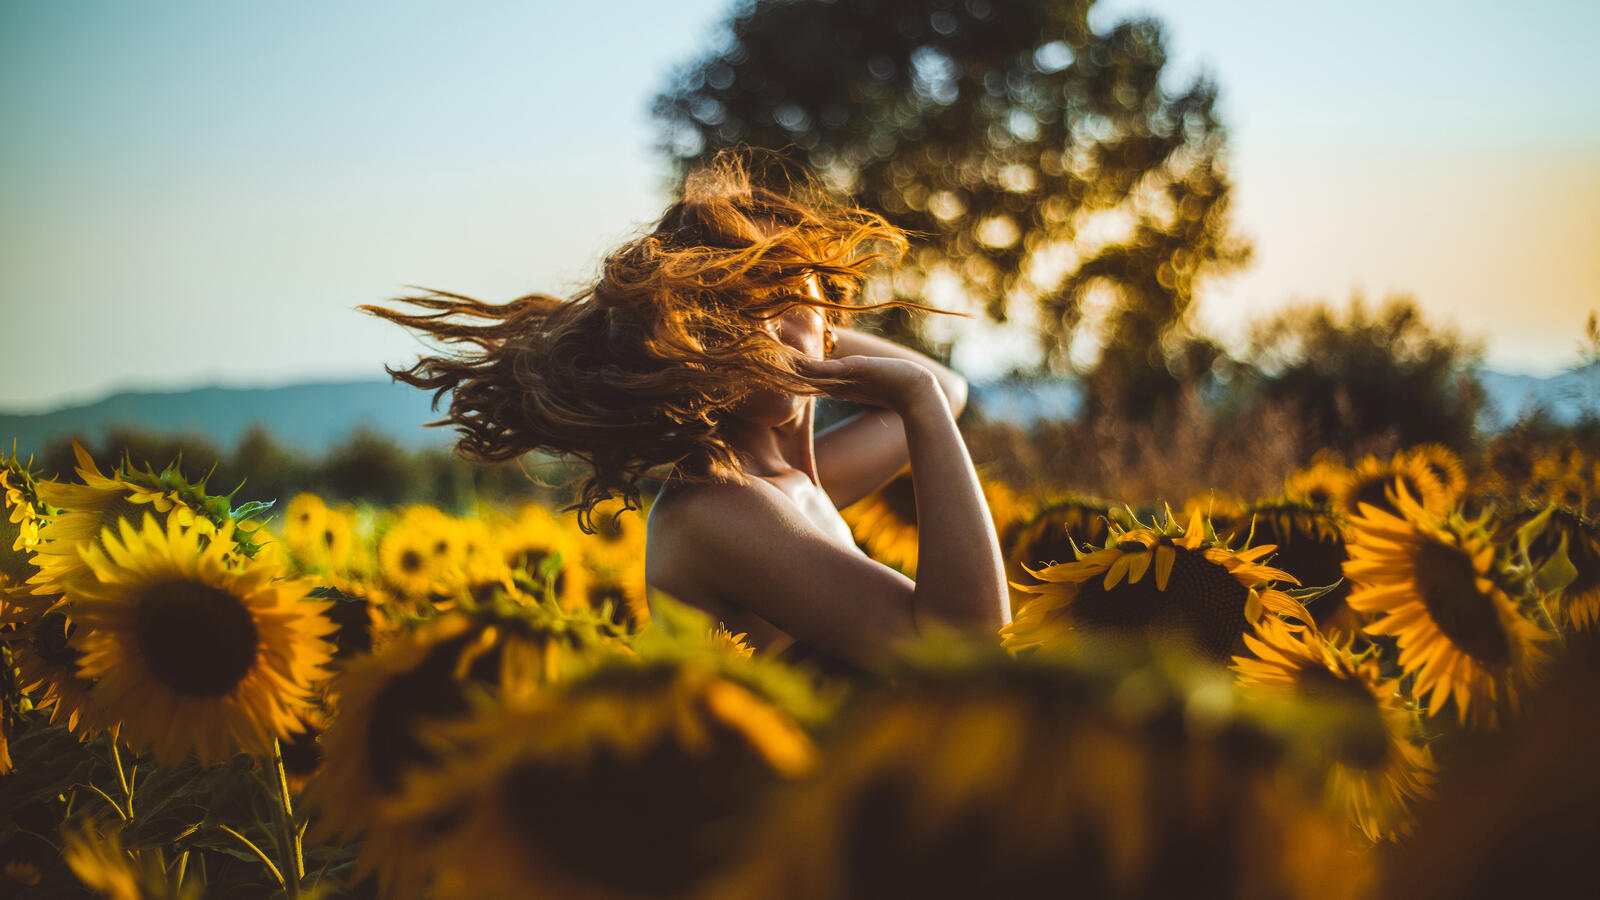 Free photo Girl with flying hair in sunflowers